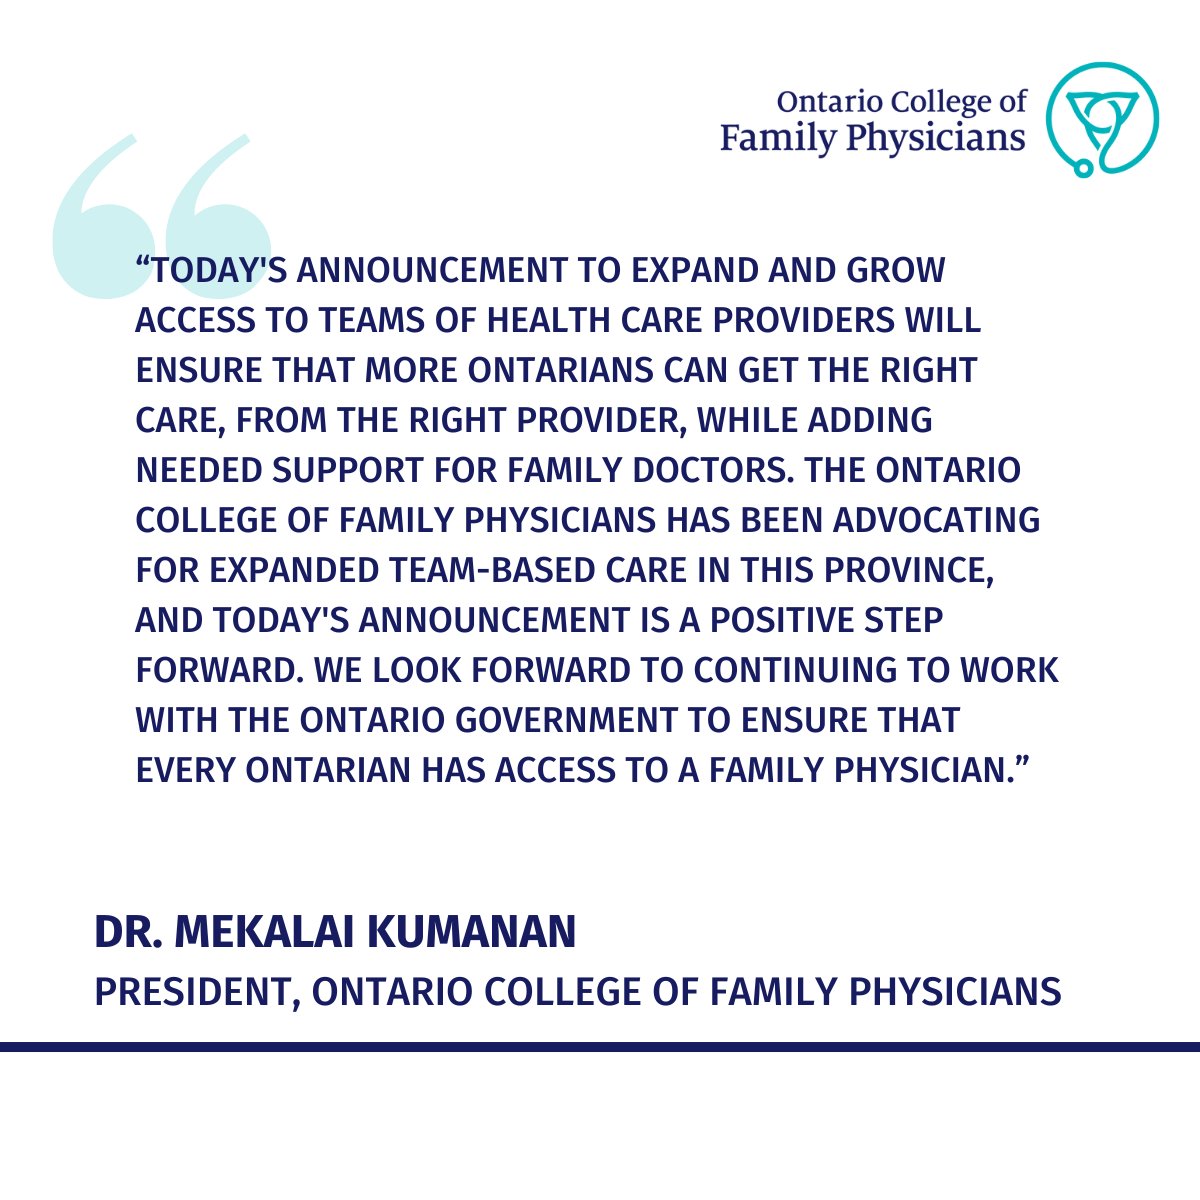 As a result of the advocacy efforts of OCFP and our partners, the Ontario government announced today that it is tripling its initial investment to support the expansion of interprofessional primary care teams across Ontario.